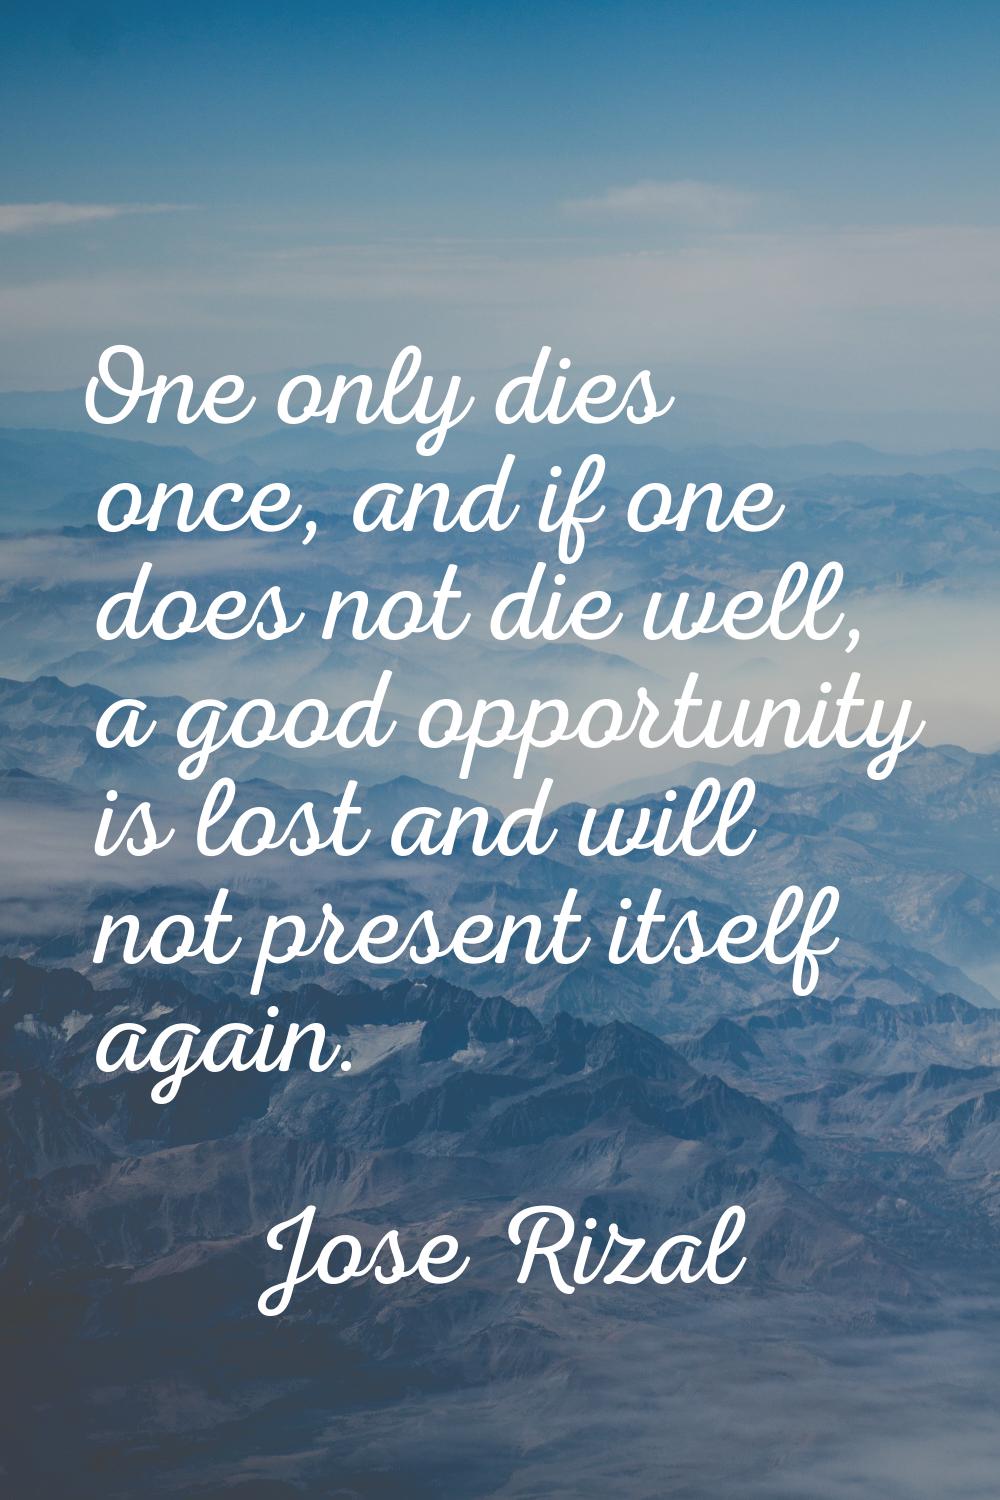 One only dies once, and if one does not die well, a good opportunity is lost and will not present i